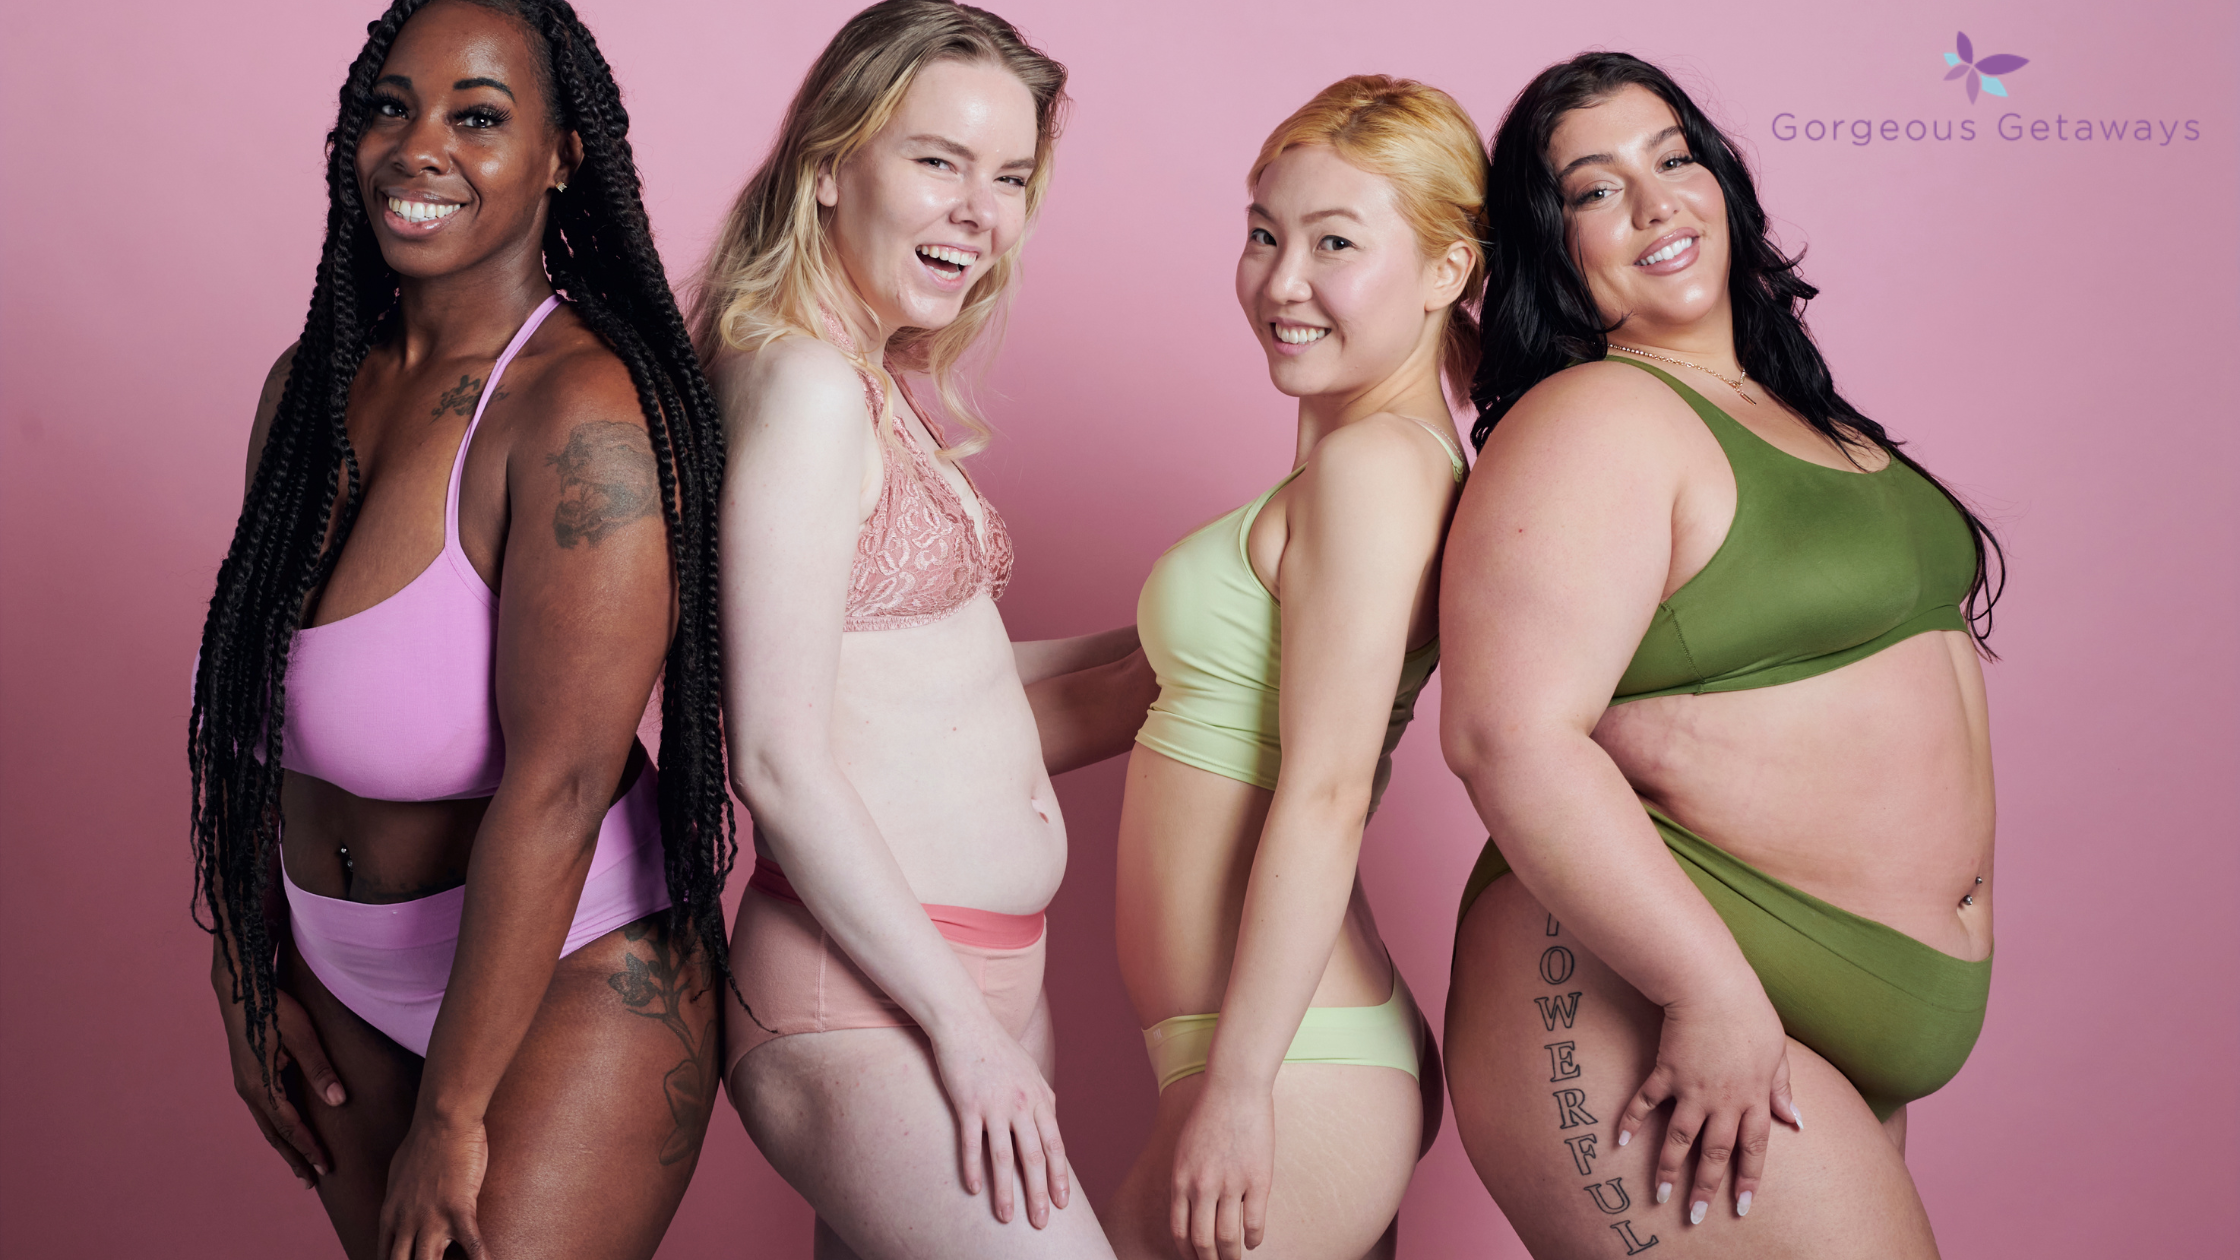 Cosmetic Surgery in Body Positivity and Self-Love Movements